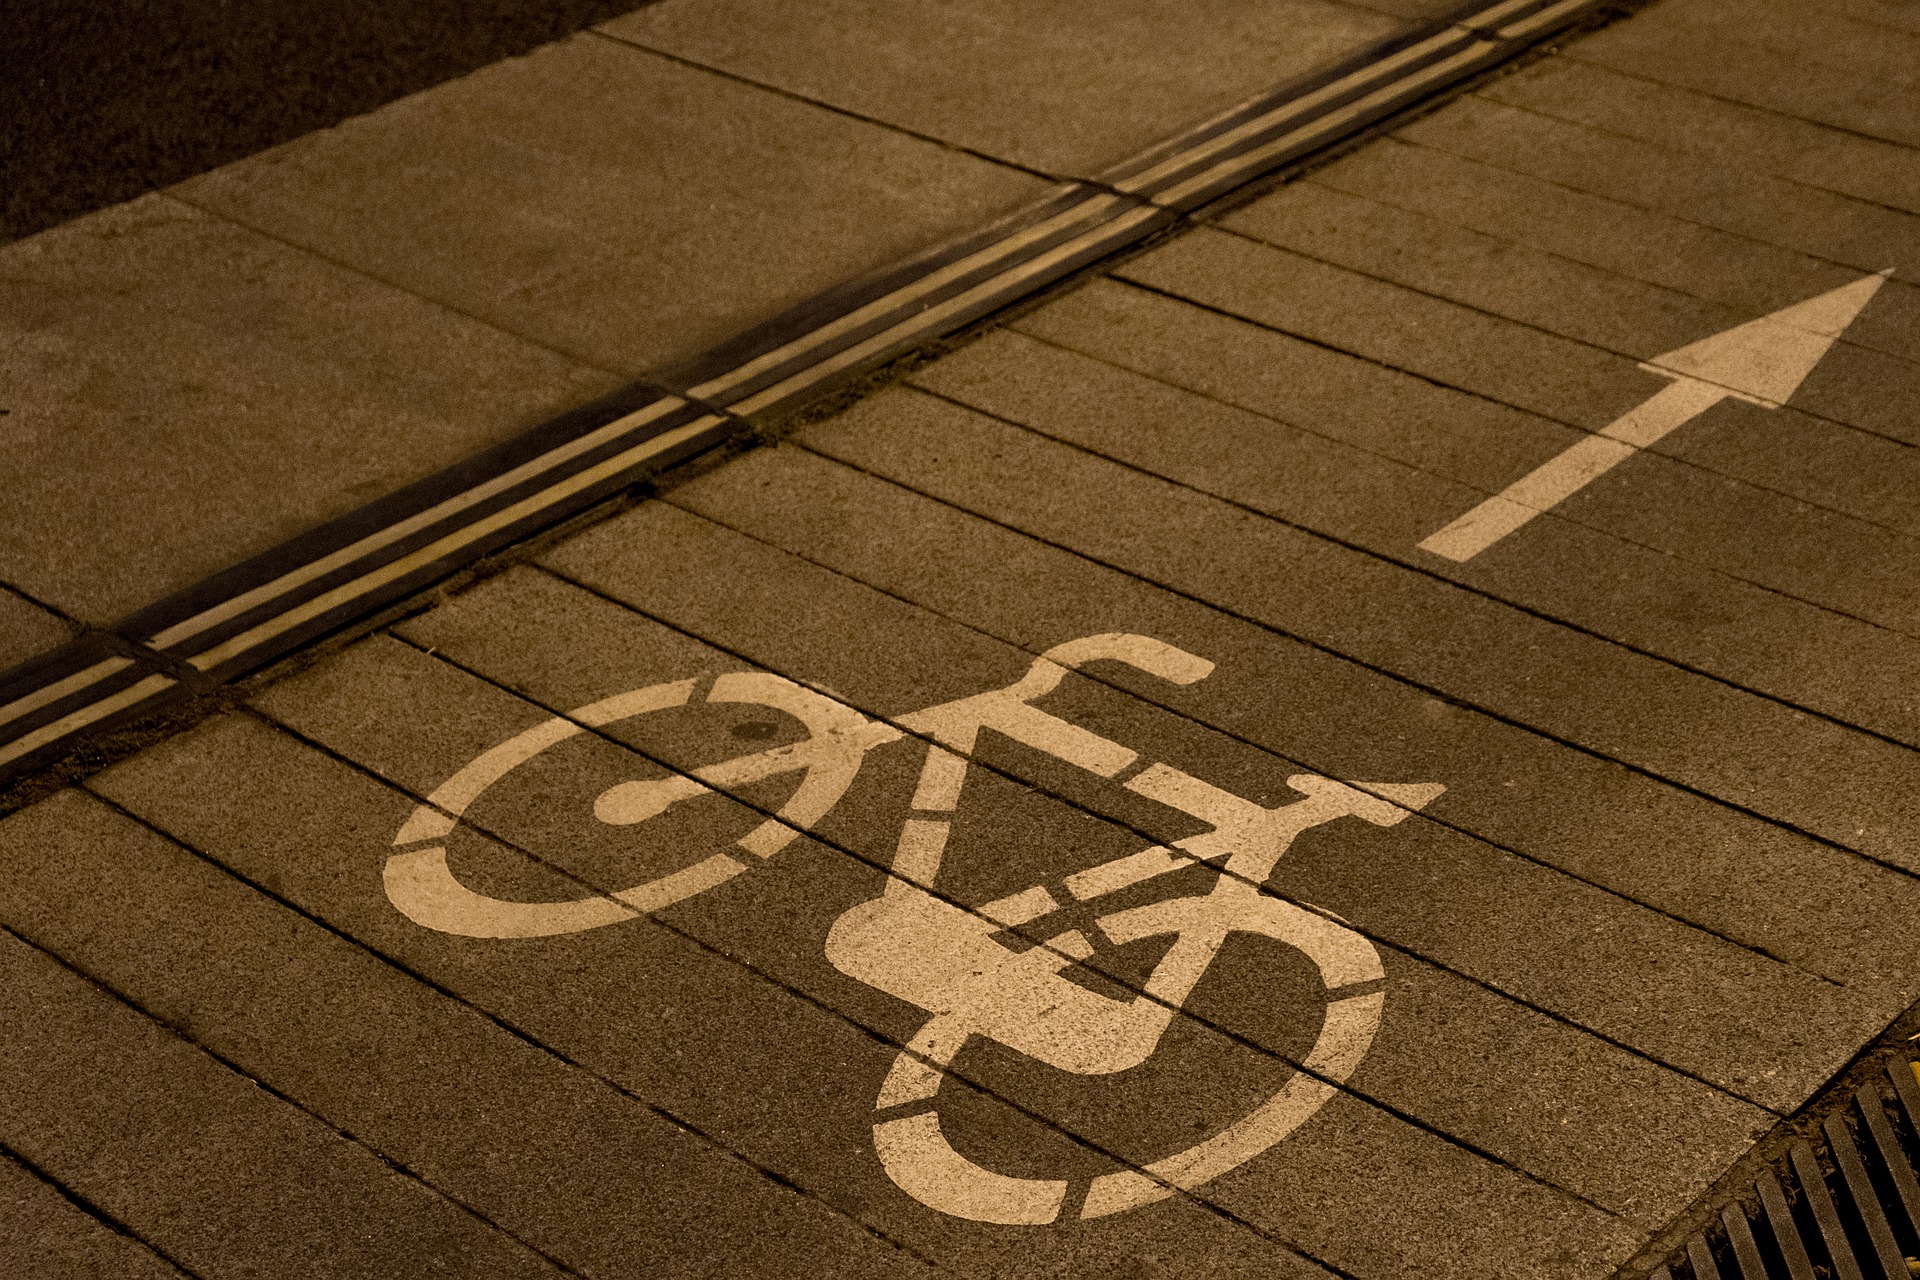 How Bicycle Lanes Make Travel Safer